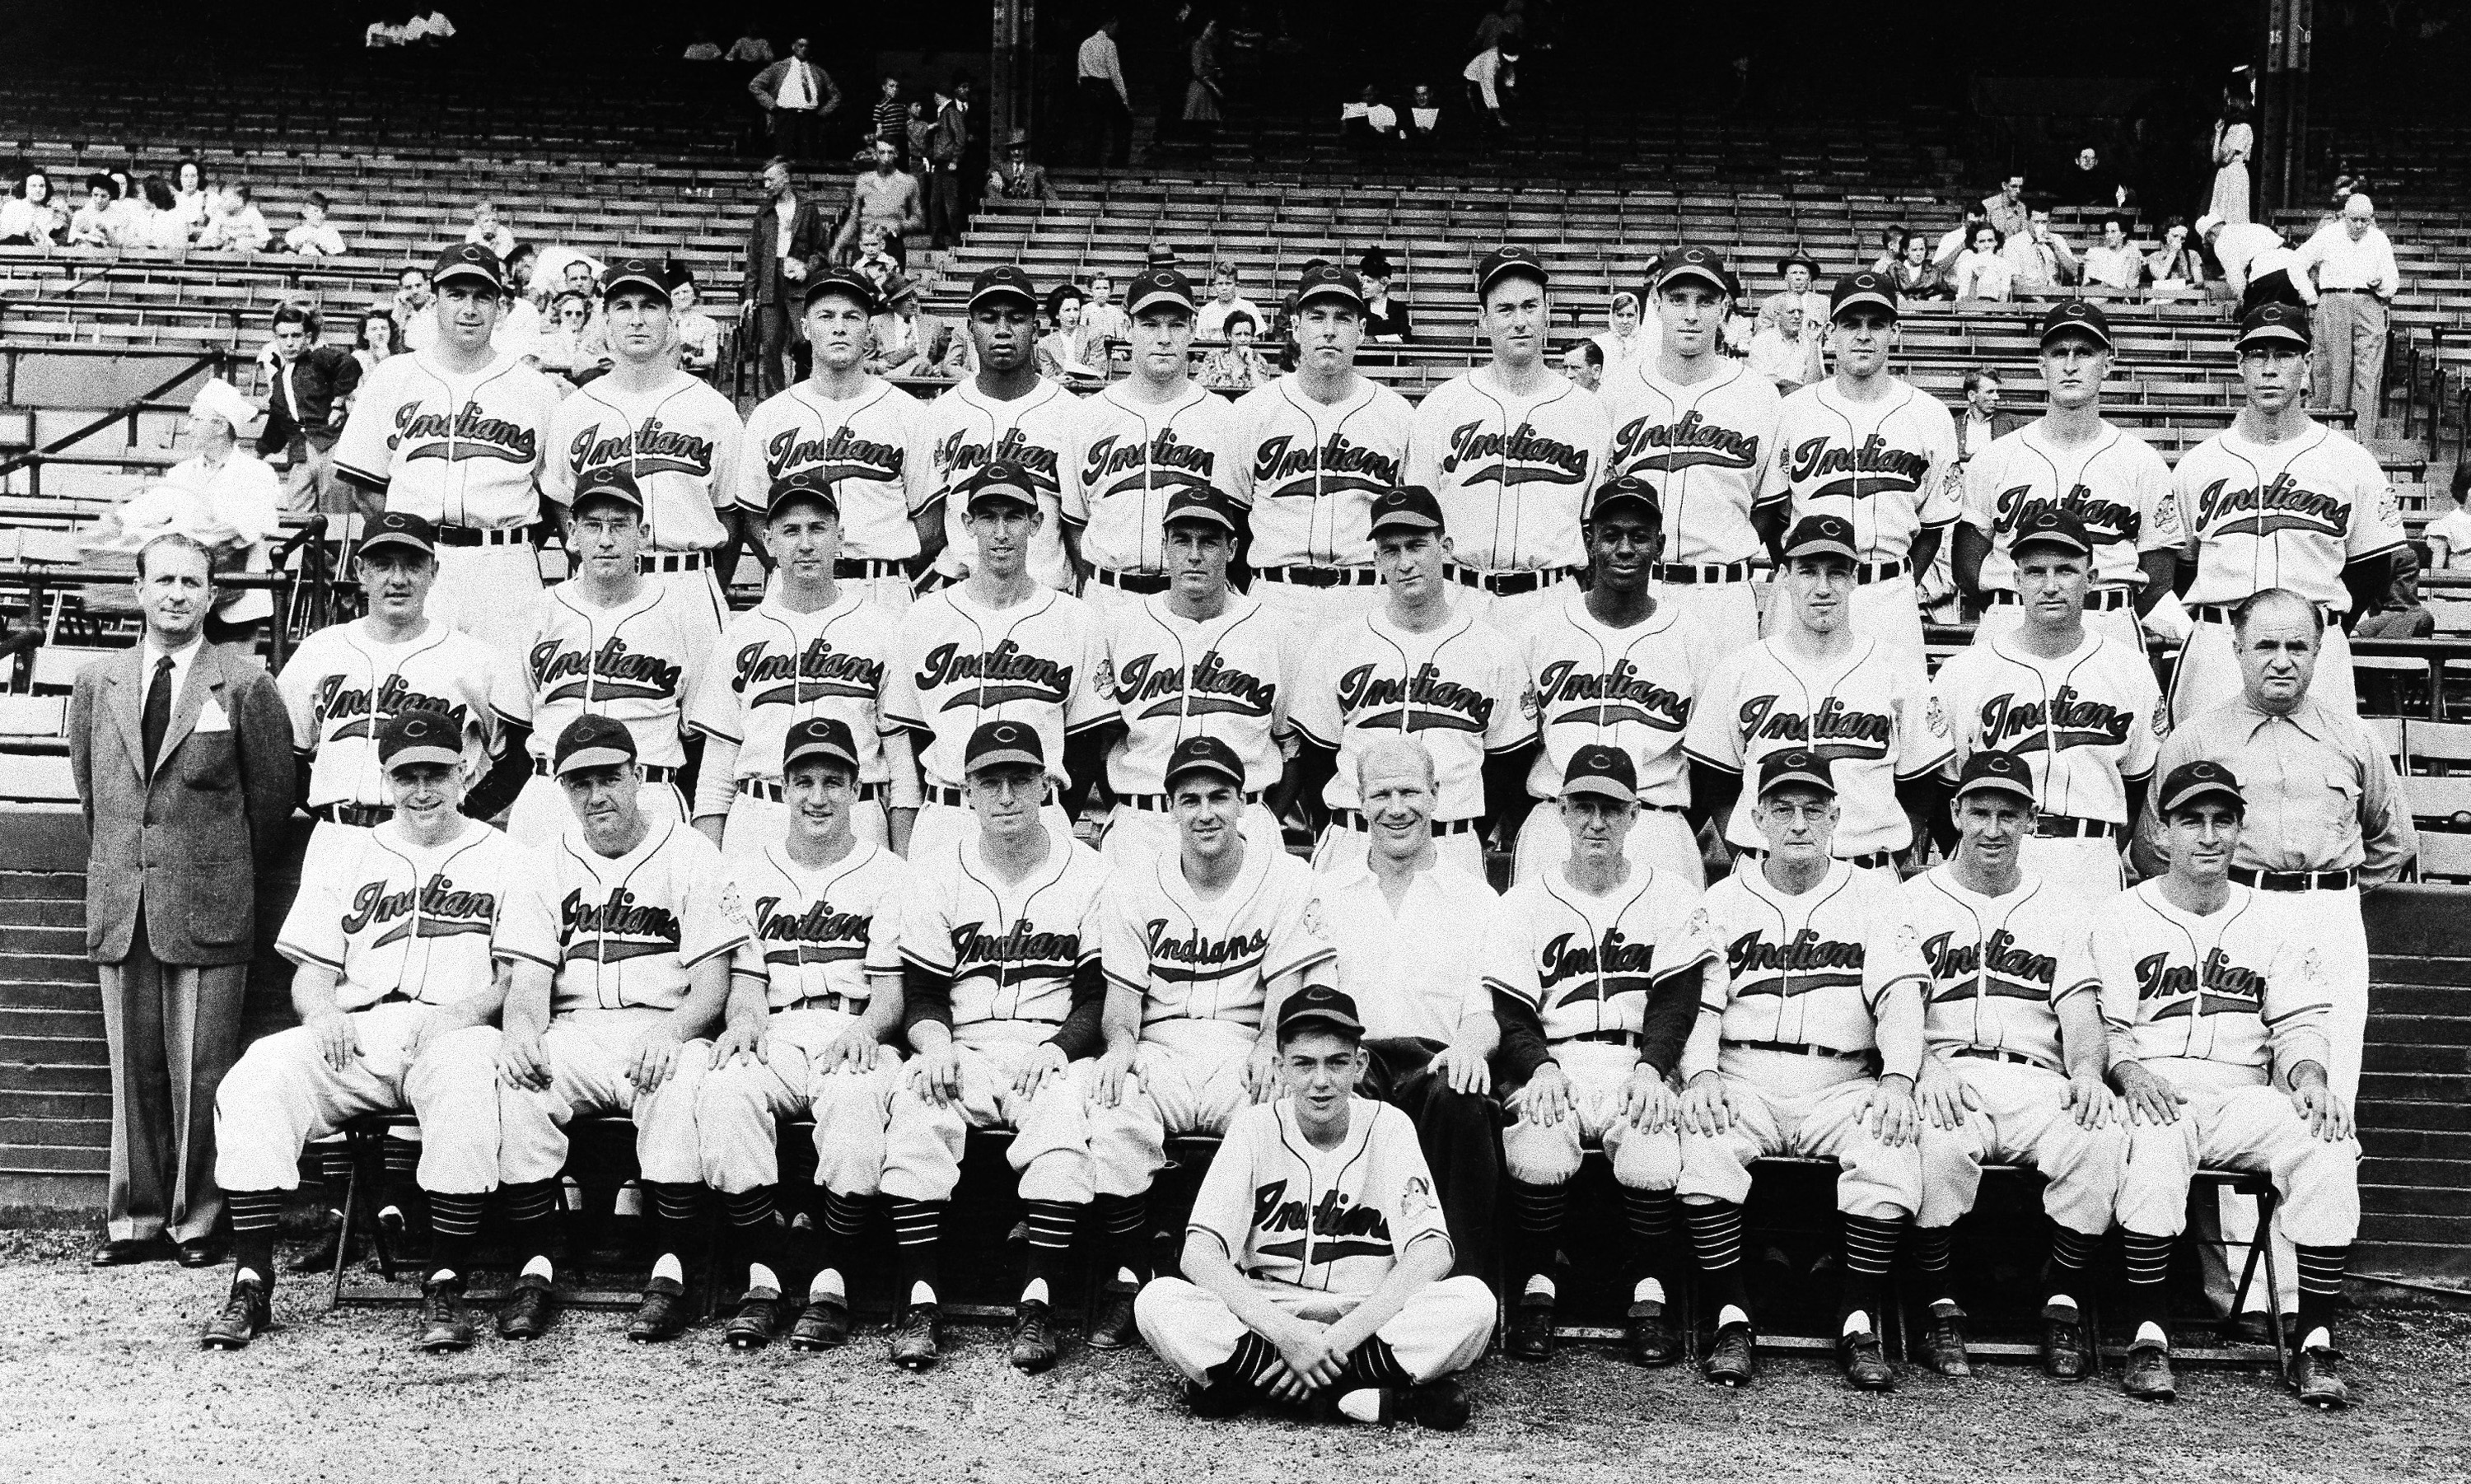 The 1948 Cleveland Indians are seen in their most recent team picture at the time on Oct. 3, 1948, in Cleveland: (front row, left to right) Eddie Robinson, first base; Ken Keltner, third base; Al Rosen, third base; Mel Harder, Coach; Manager Lou Boudreau, shortstop; President Bill Veeck; Muddy Ruel, Coach; Bill McKechnie, Coach; Joe Gordon, second base; and Johnny Beradino, traveling secretary; Sam Zoldak, Ed Kleiman, Steve Gromek, Russ Christopher, Gene Bearden, Bob Lemon, Satchel Paige, Bob Feller, and Bob Muncriff (all pitchers); Lefty Weisman, trainer; (top row) Walt Judnich, Allie Clark, Hal Peck, Larry Doby, Hank Edwards, Dale Mitchell, Bob Kennedy, all outfielders; Jim Hegan, catcher; Ray Boone, shortstop and catcher; Joe Tipton, catcher; and Thurman Tucker, outfielder.